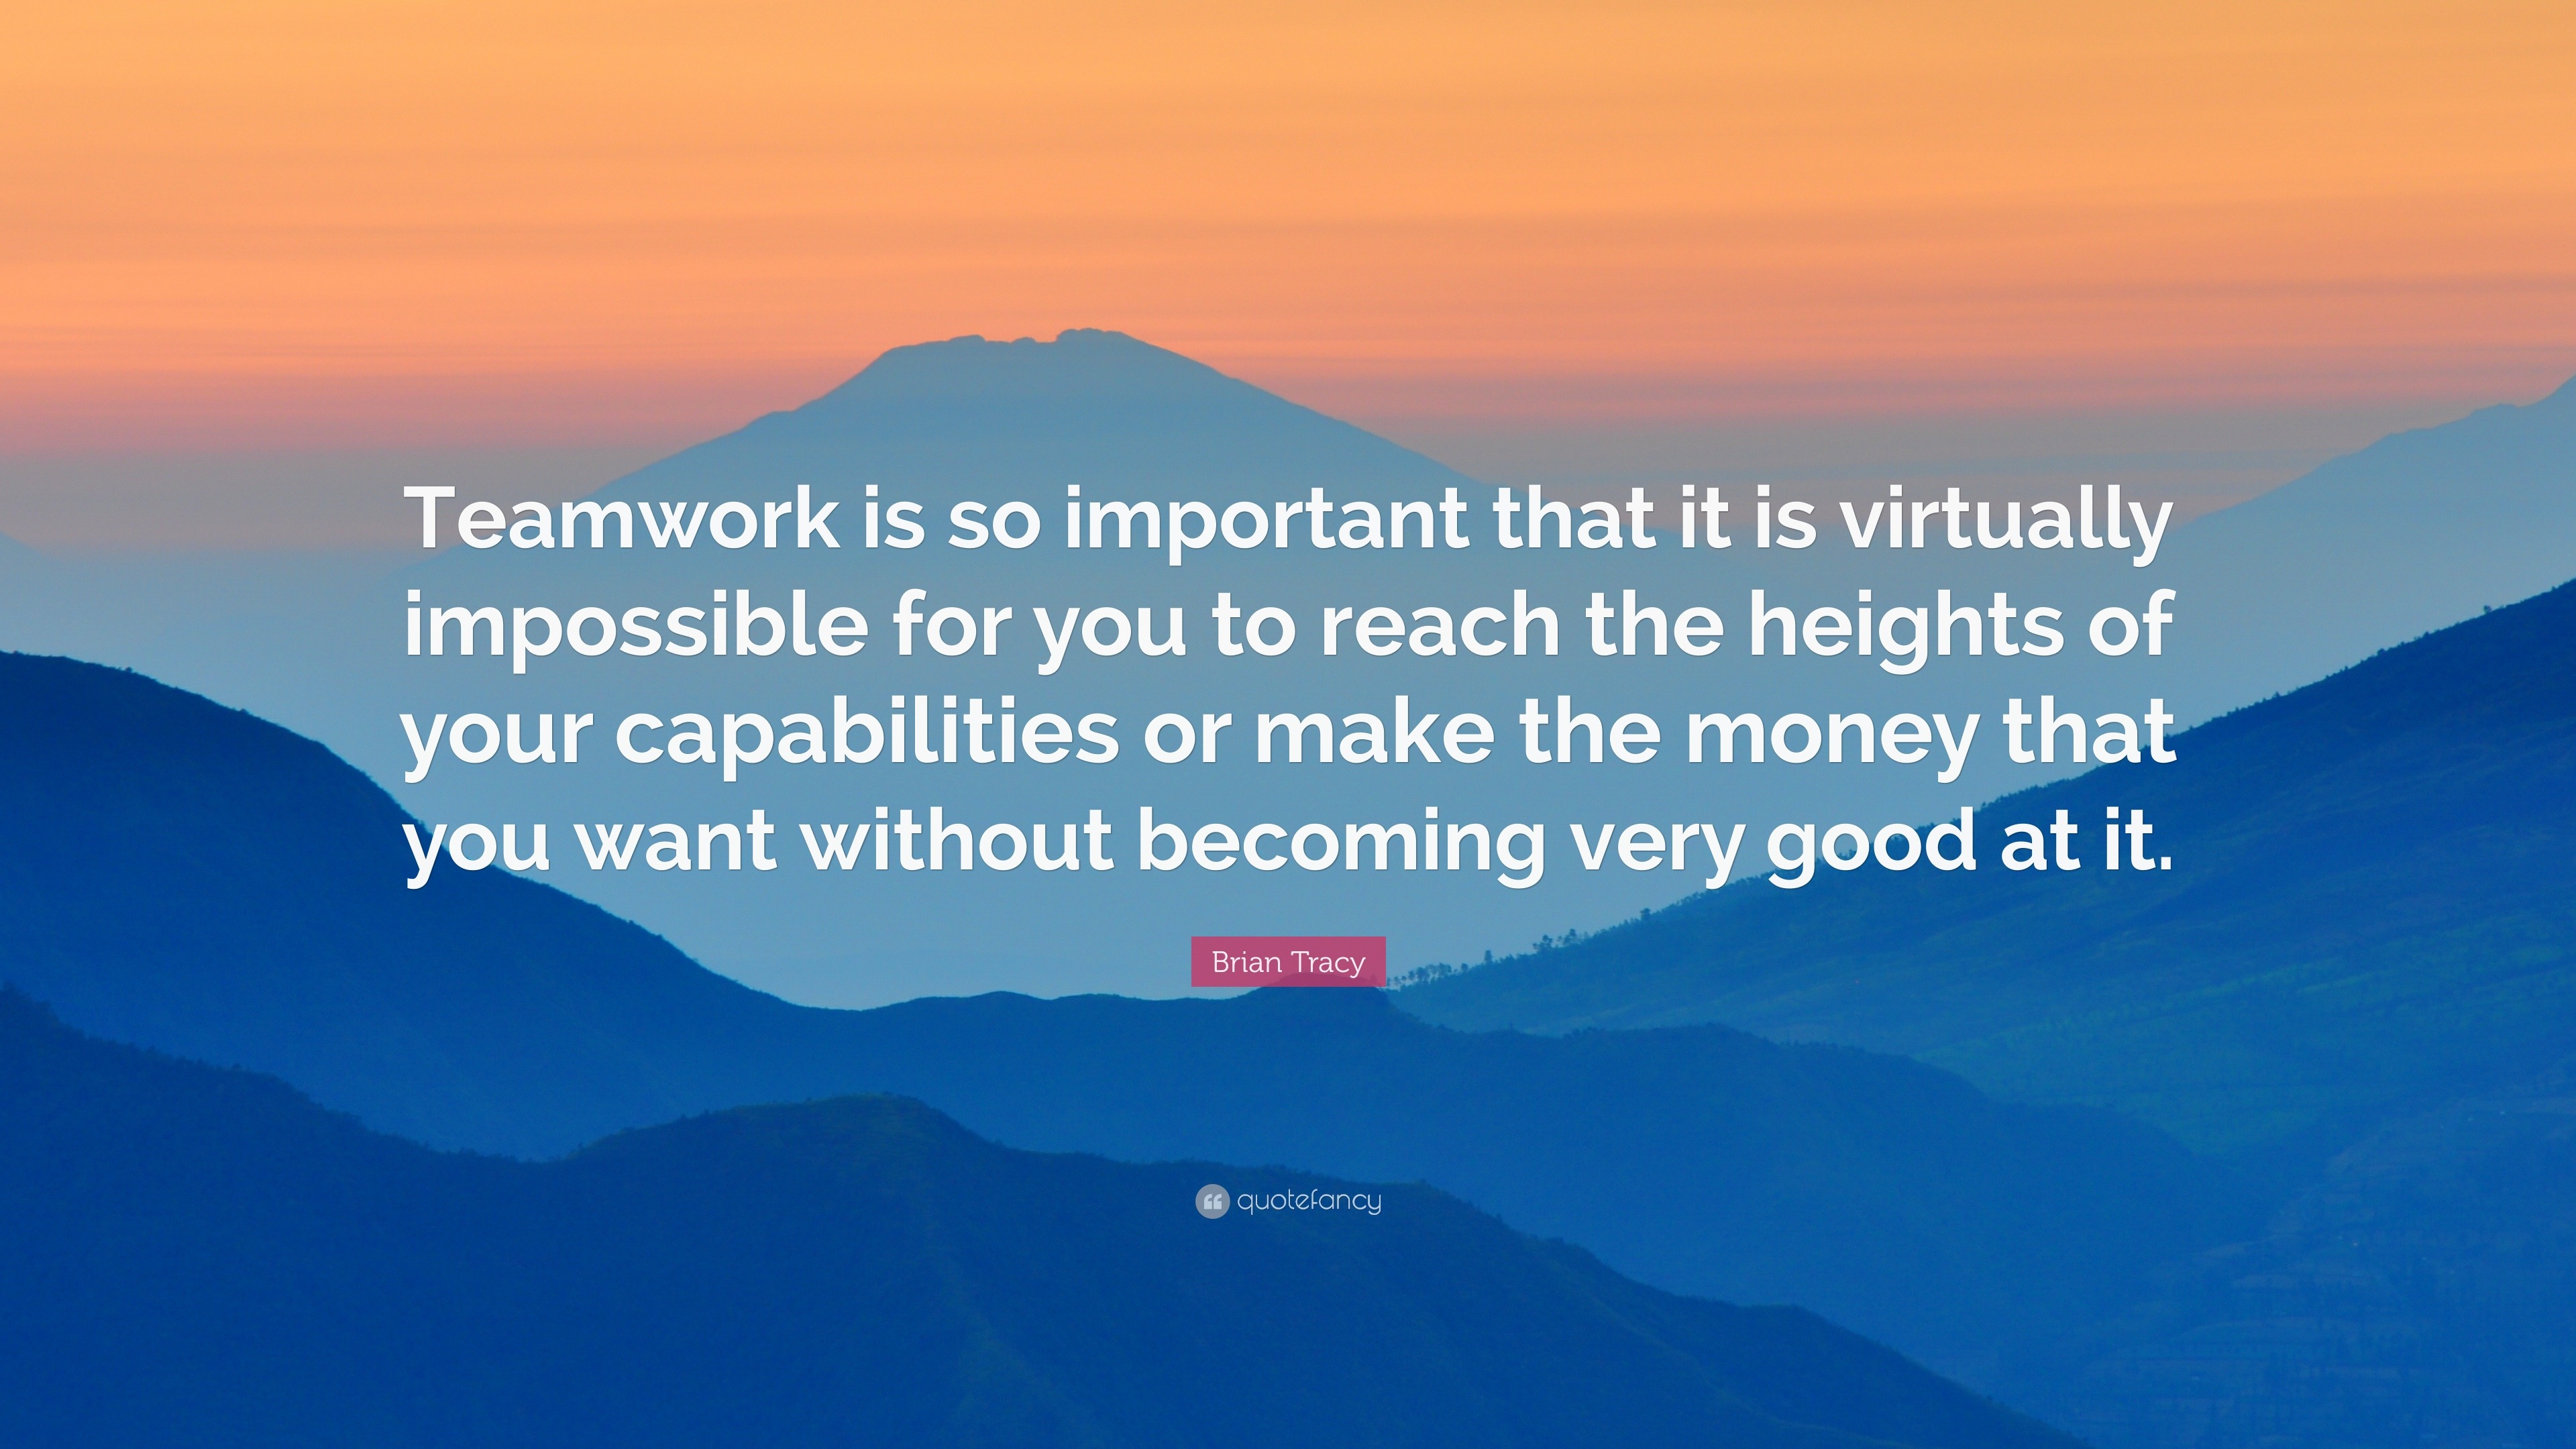 Brian Tracy Quote: “Teamwork is so important that it is virtually ...